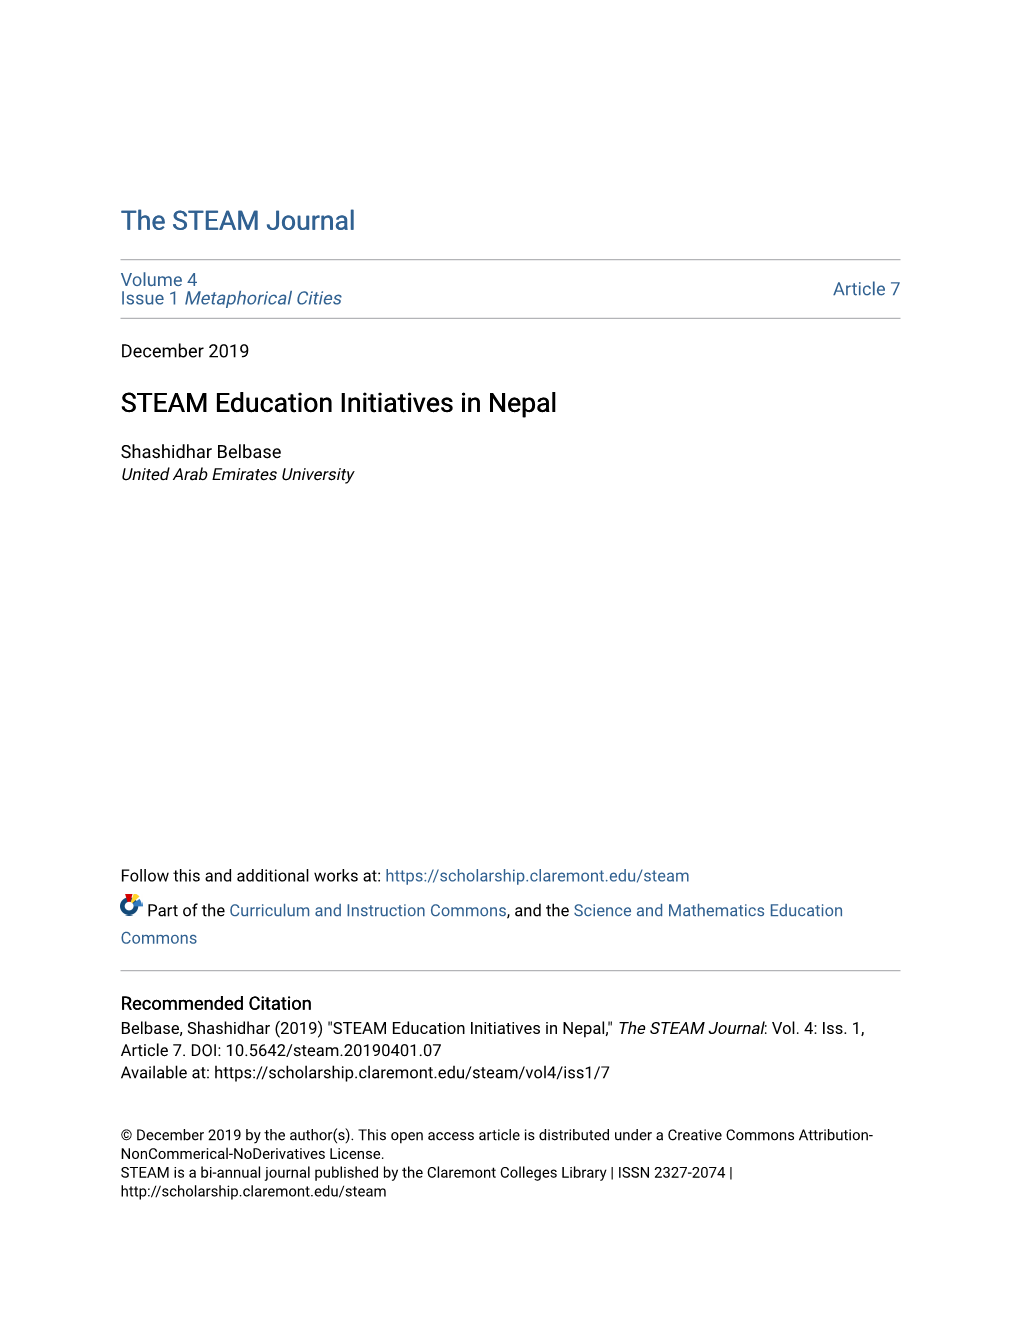 STEAM Education Initiatives in Nepal